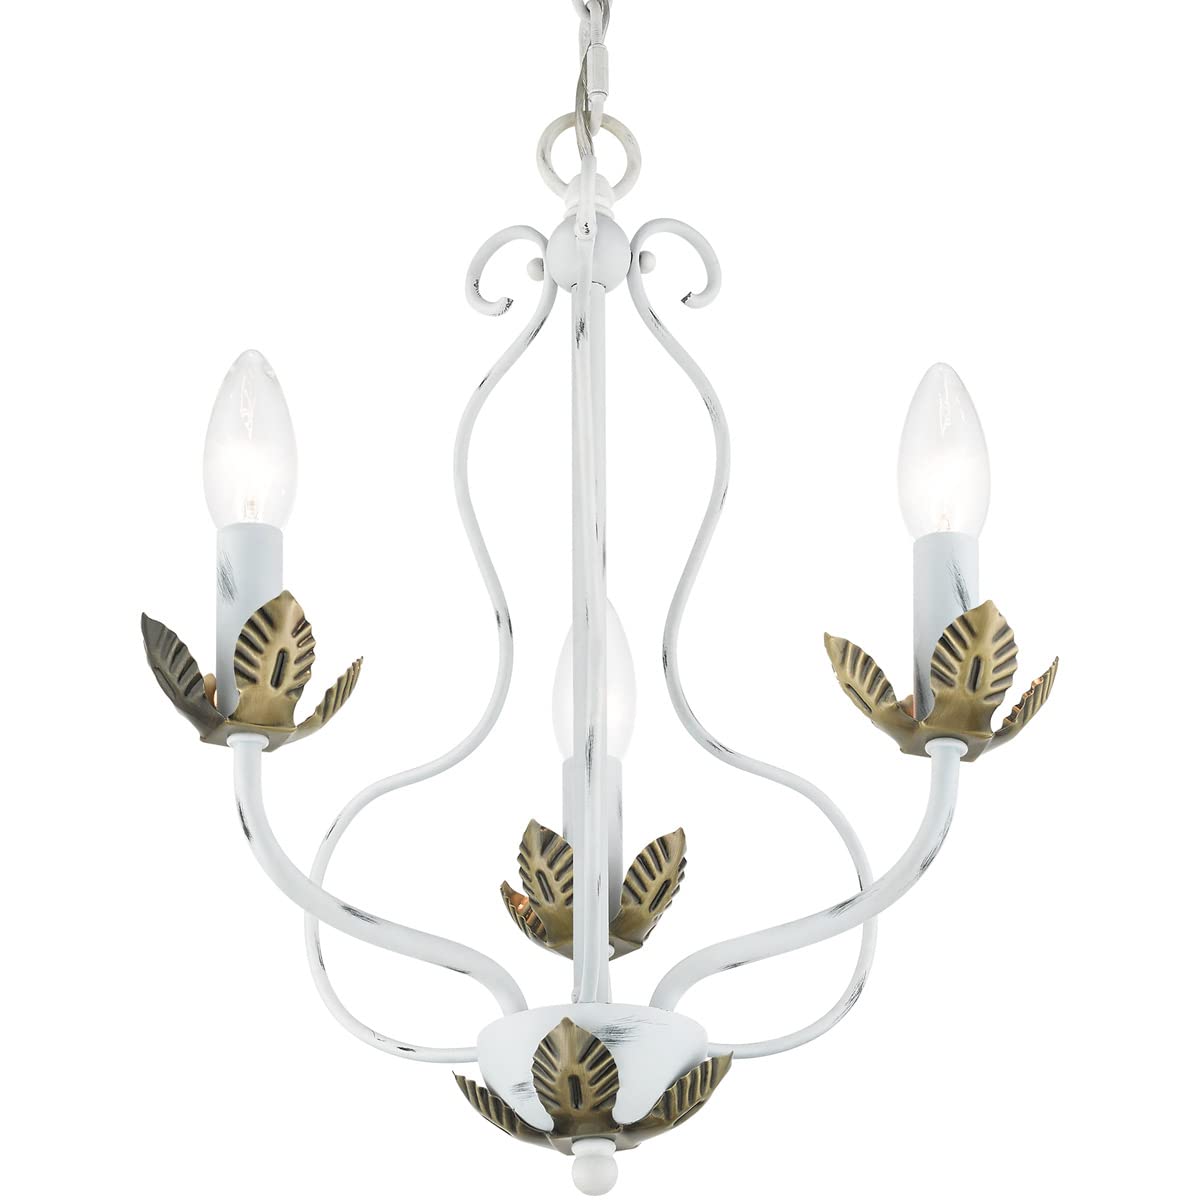 Livex Lighting 42903-60 Katarina 3 Light 13 inch Antique White with Antique Brass Accents Chandelier Ceiling Light